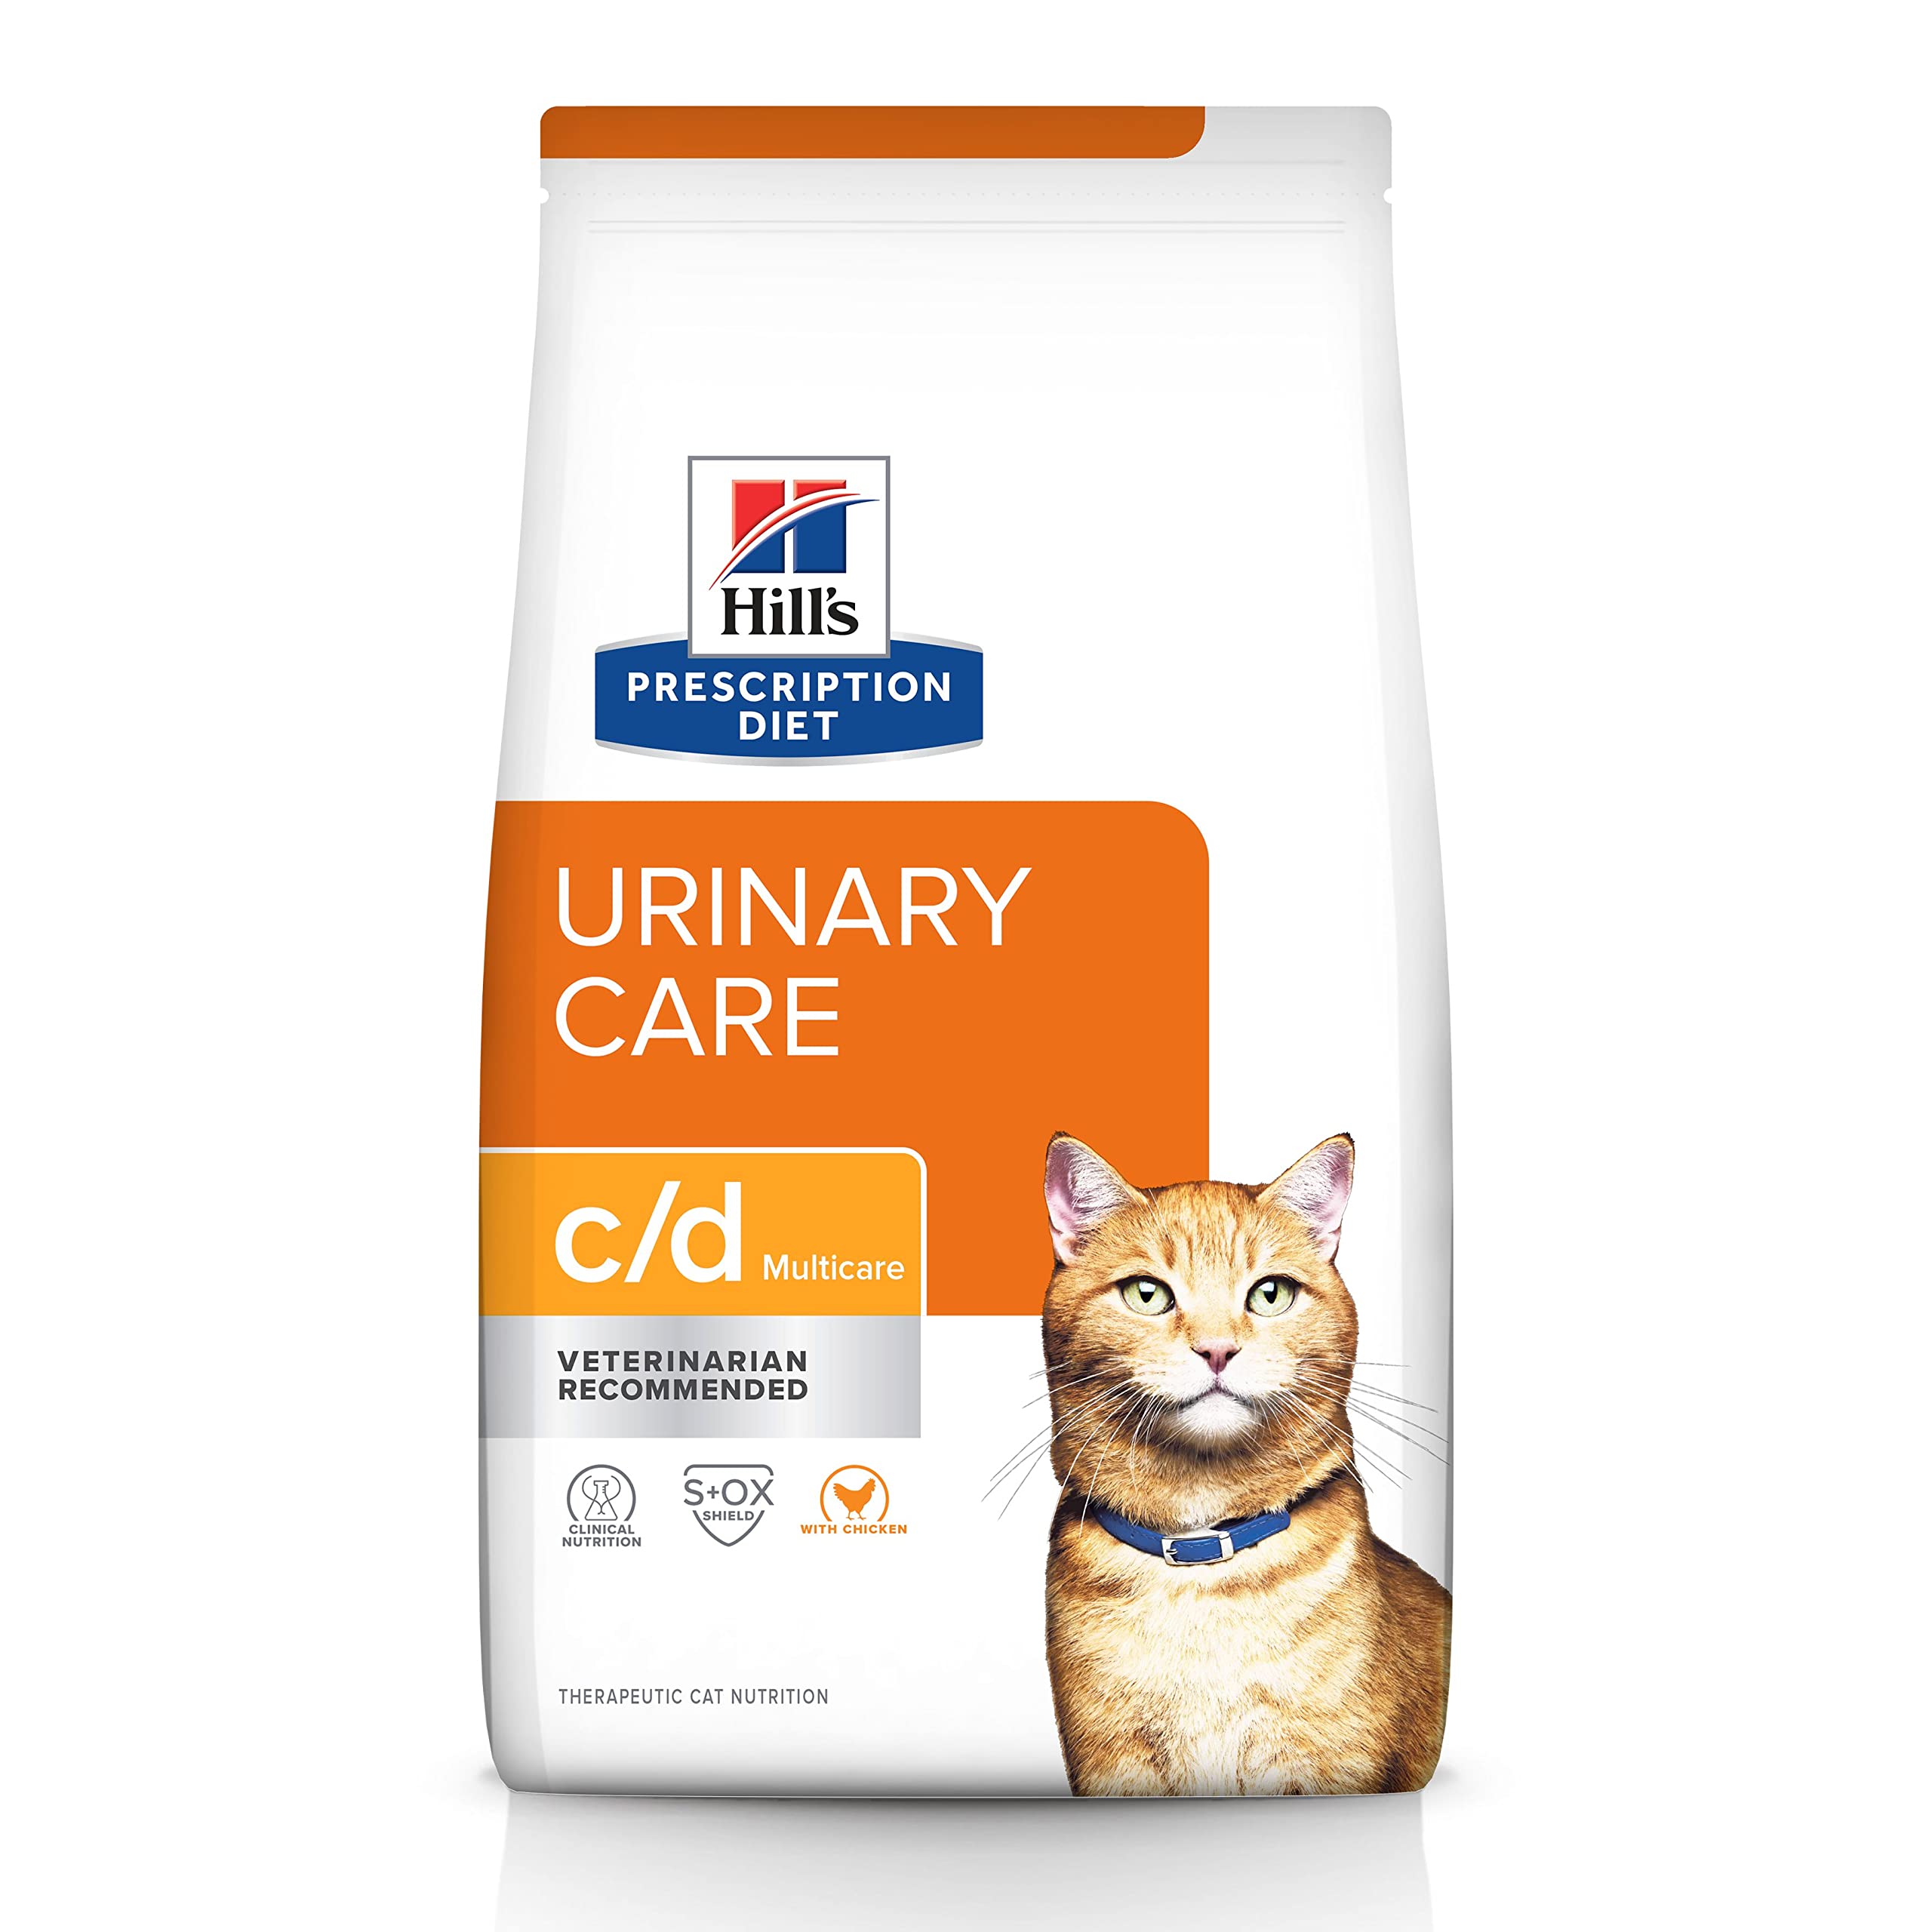 HILL'S PRESCRIPTION DIET c/d Multicare Urinary Care with Chicken Dry Cat Food, Veterinary Diet, 8.5 lb. Bag